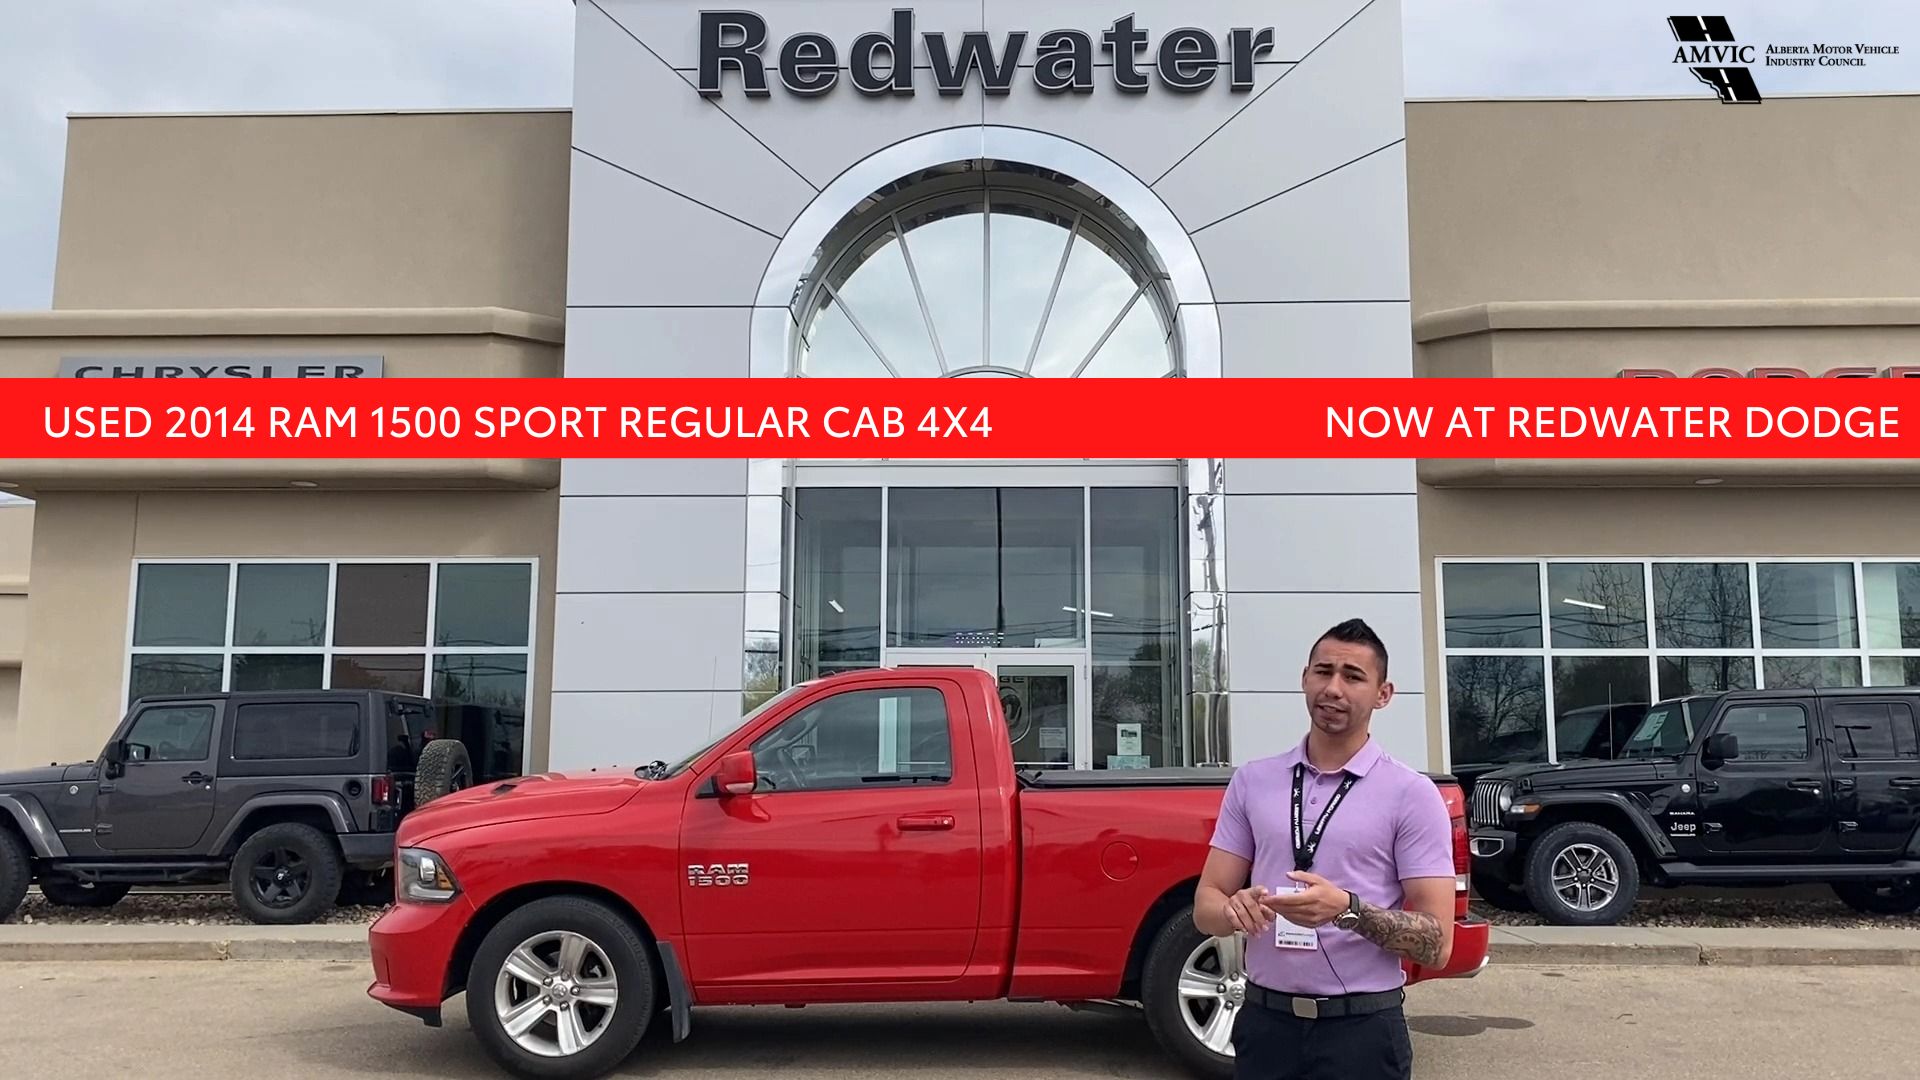 Used 2014 RAM 1500 Sport Regular Cab 4x4 - Flame Red | Stock # P1380 - Redwater Dodge